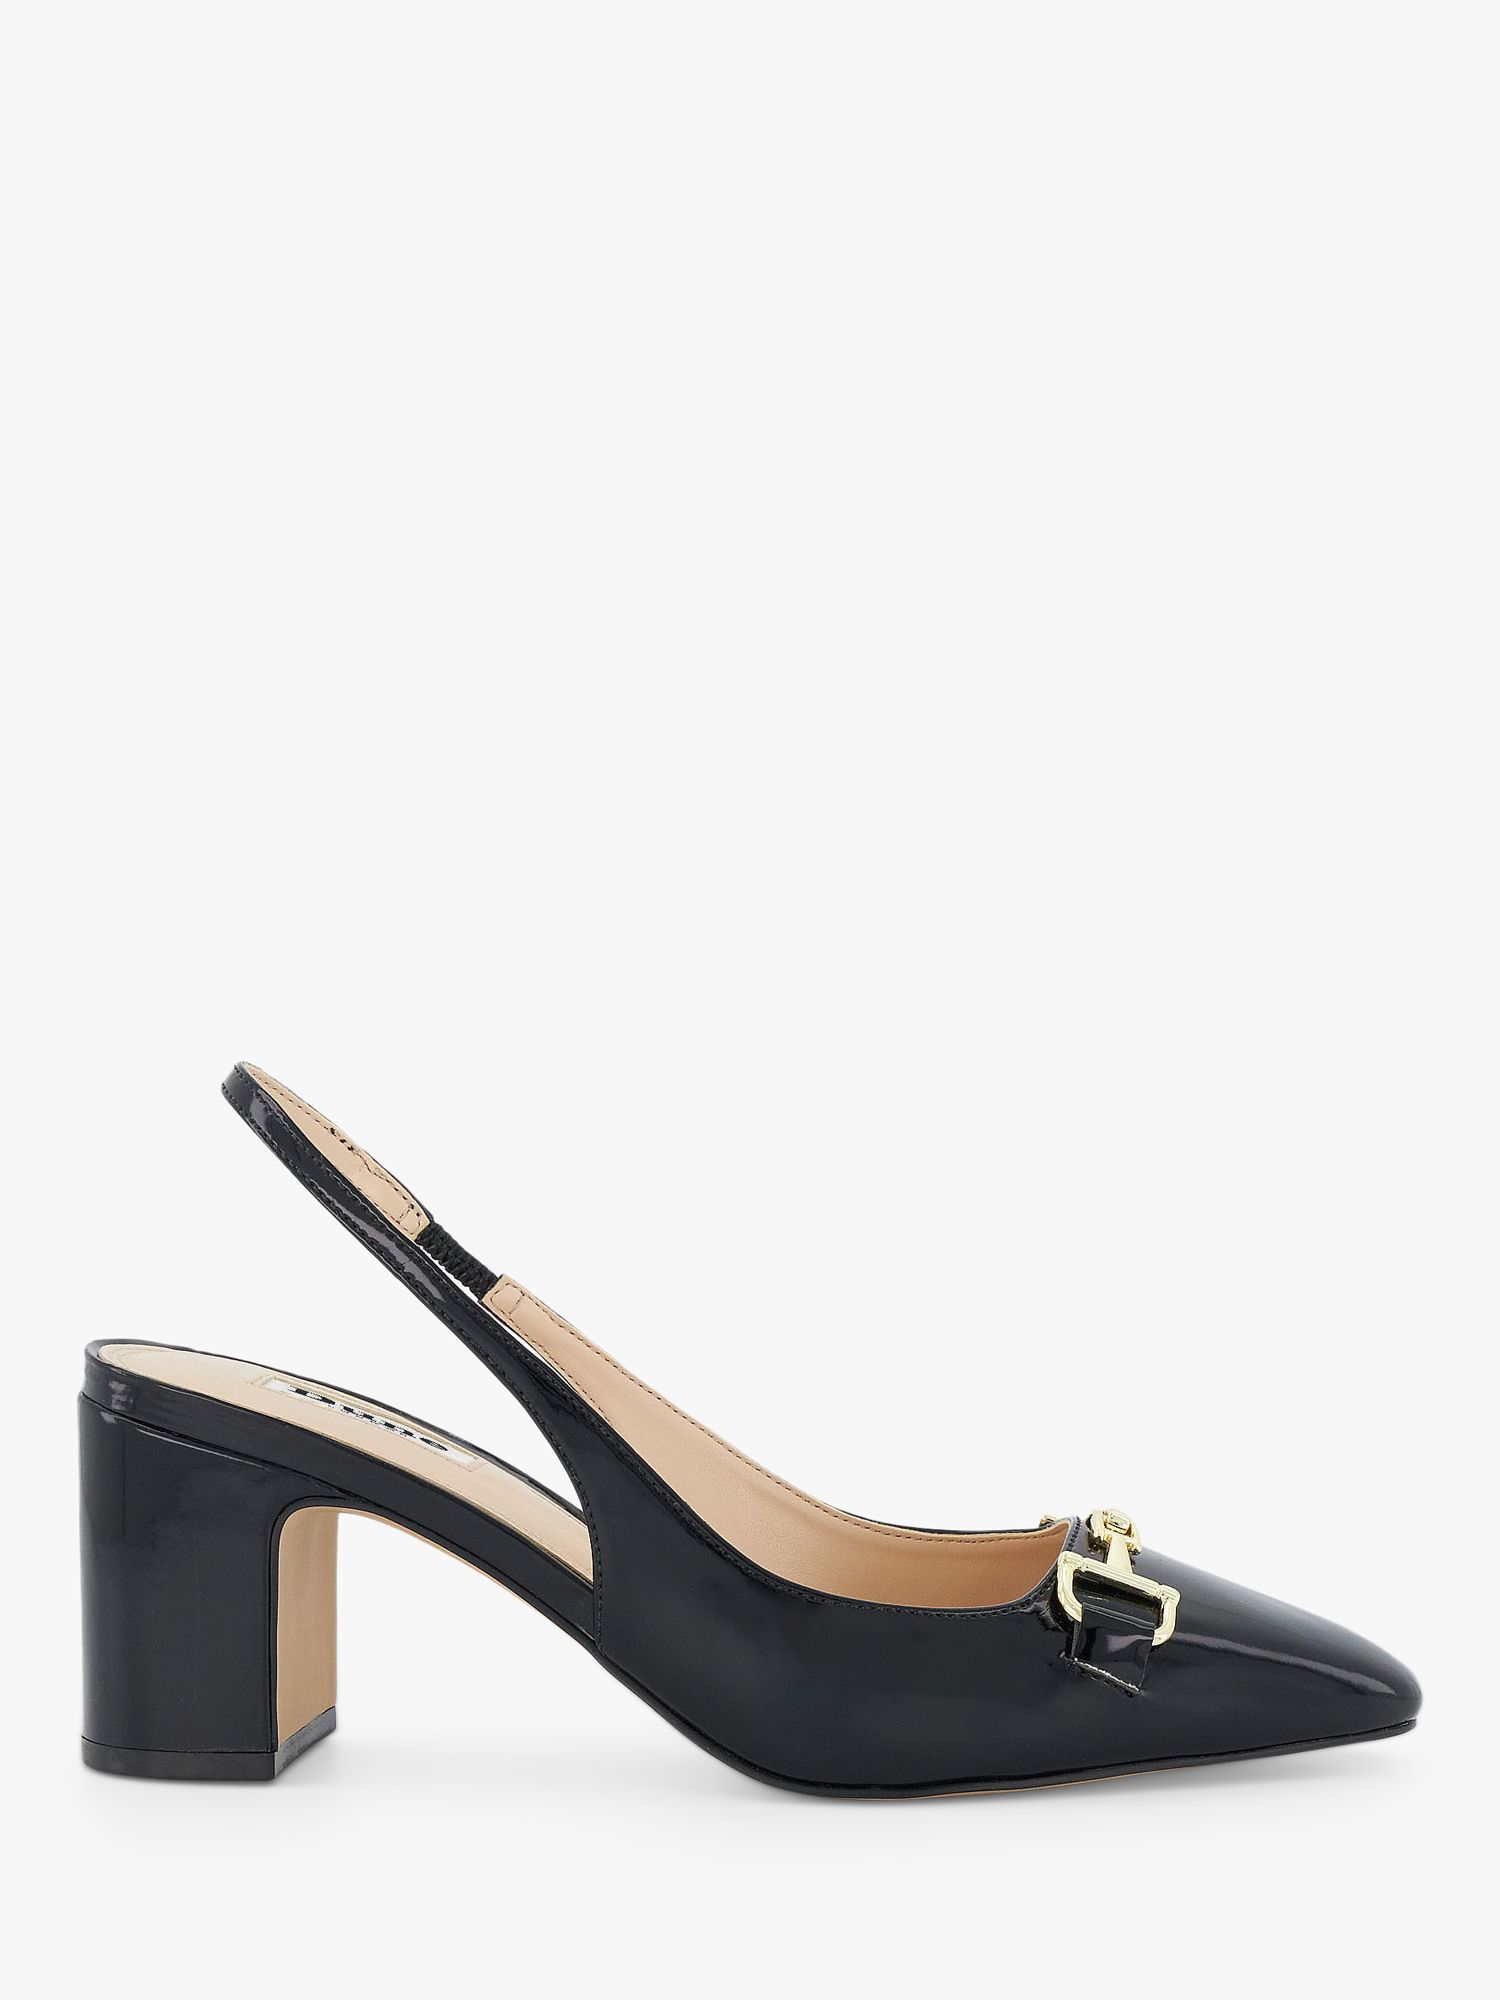 Dune Detailed Fabric Court Shoes, Black at John Lewis & Partners